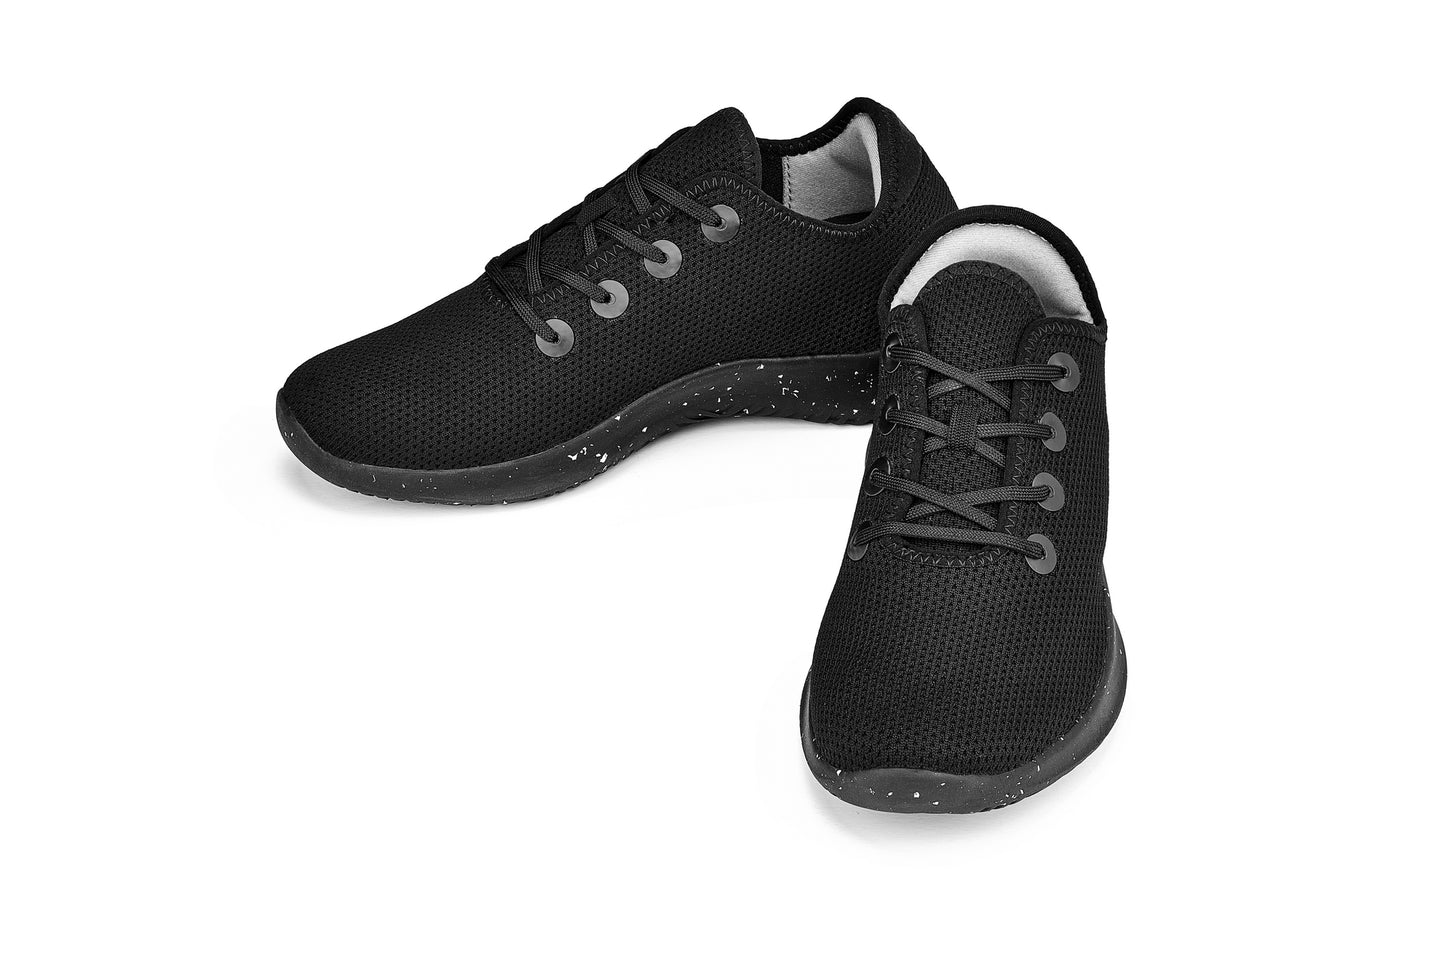 CALTO - Q400 - 2.4 Inches Taller (Black/Noire & Speckle Sole) - Ultra Lightweight Knitted Sneakers